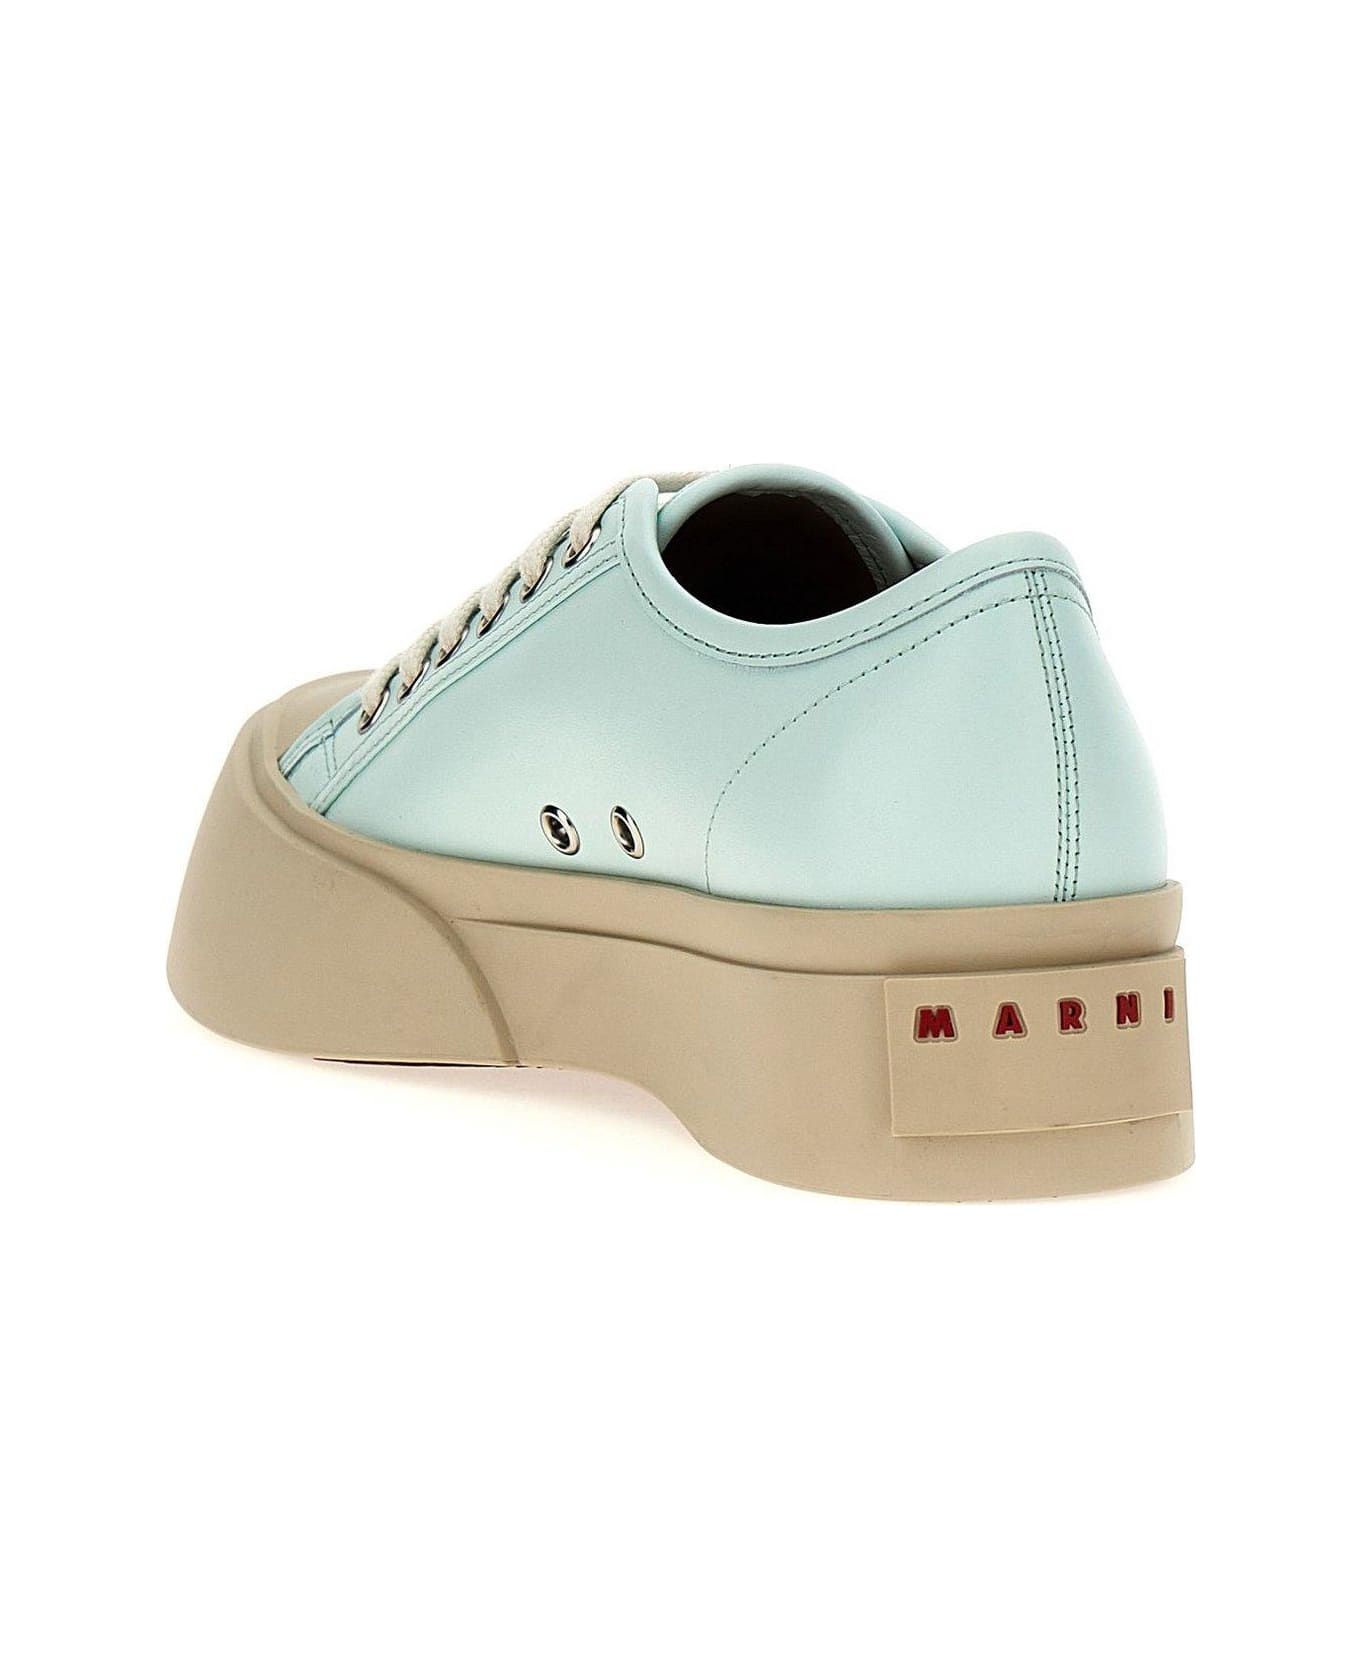 Marni Pablo Lace-up Sneakers